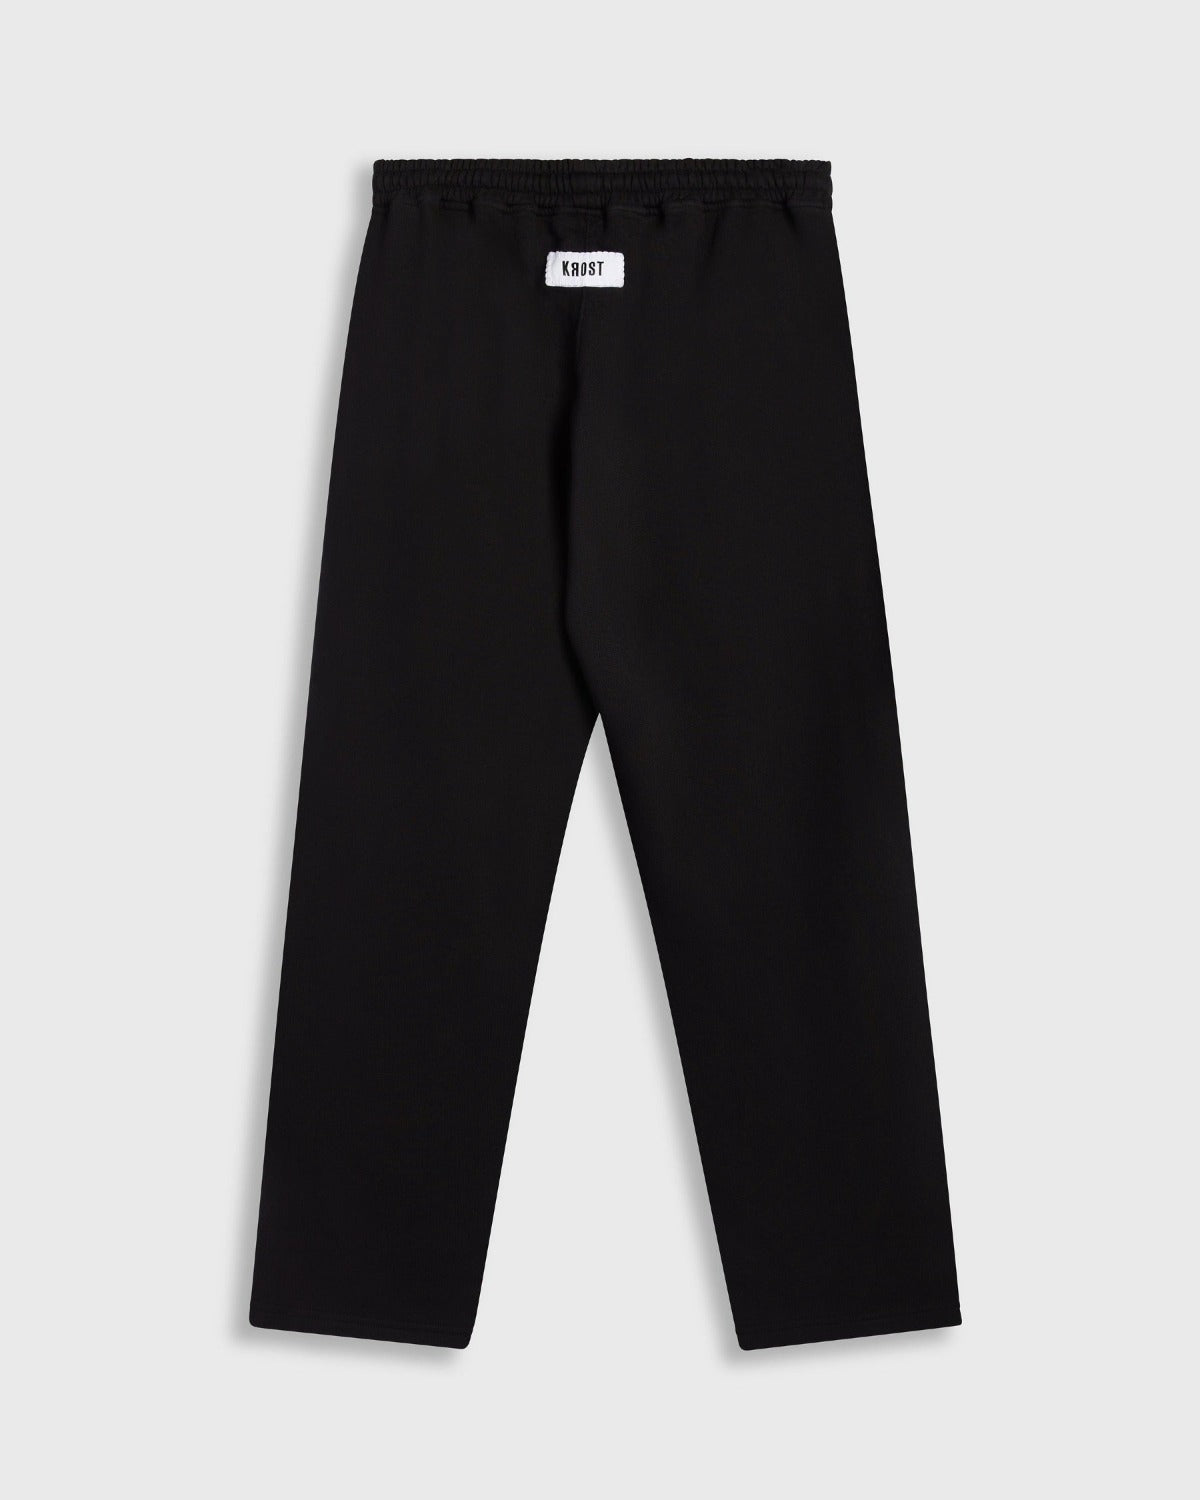 Photo of KROST x Candy Land | Vintage Straight Leg Sweatpants, number 6